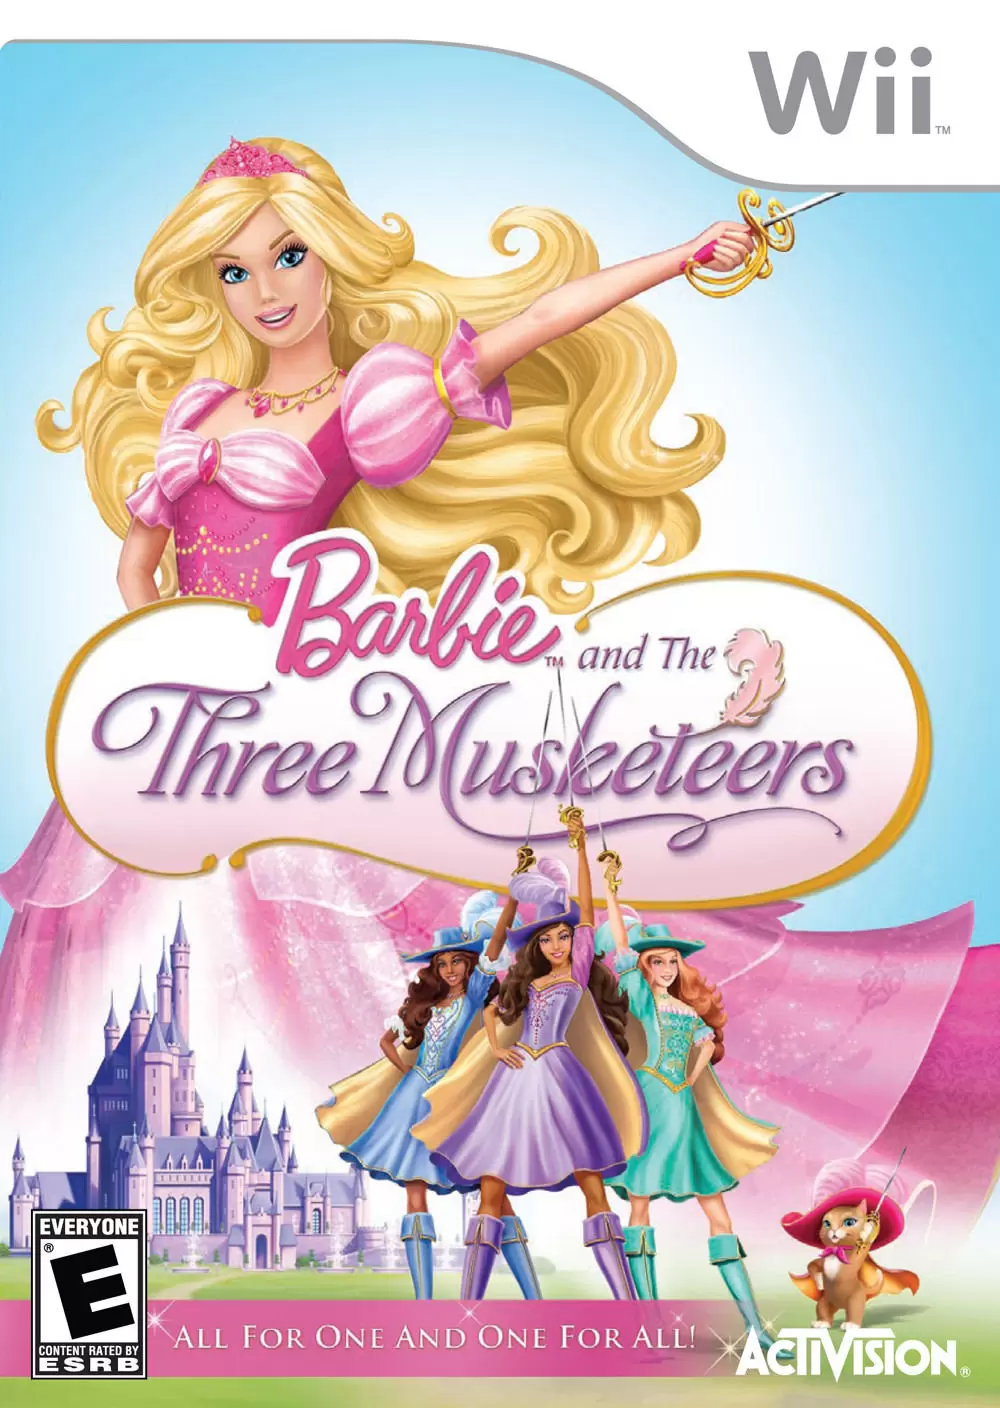 Nintendo Wii Games - Barbie and the Three Musketeers